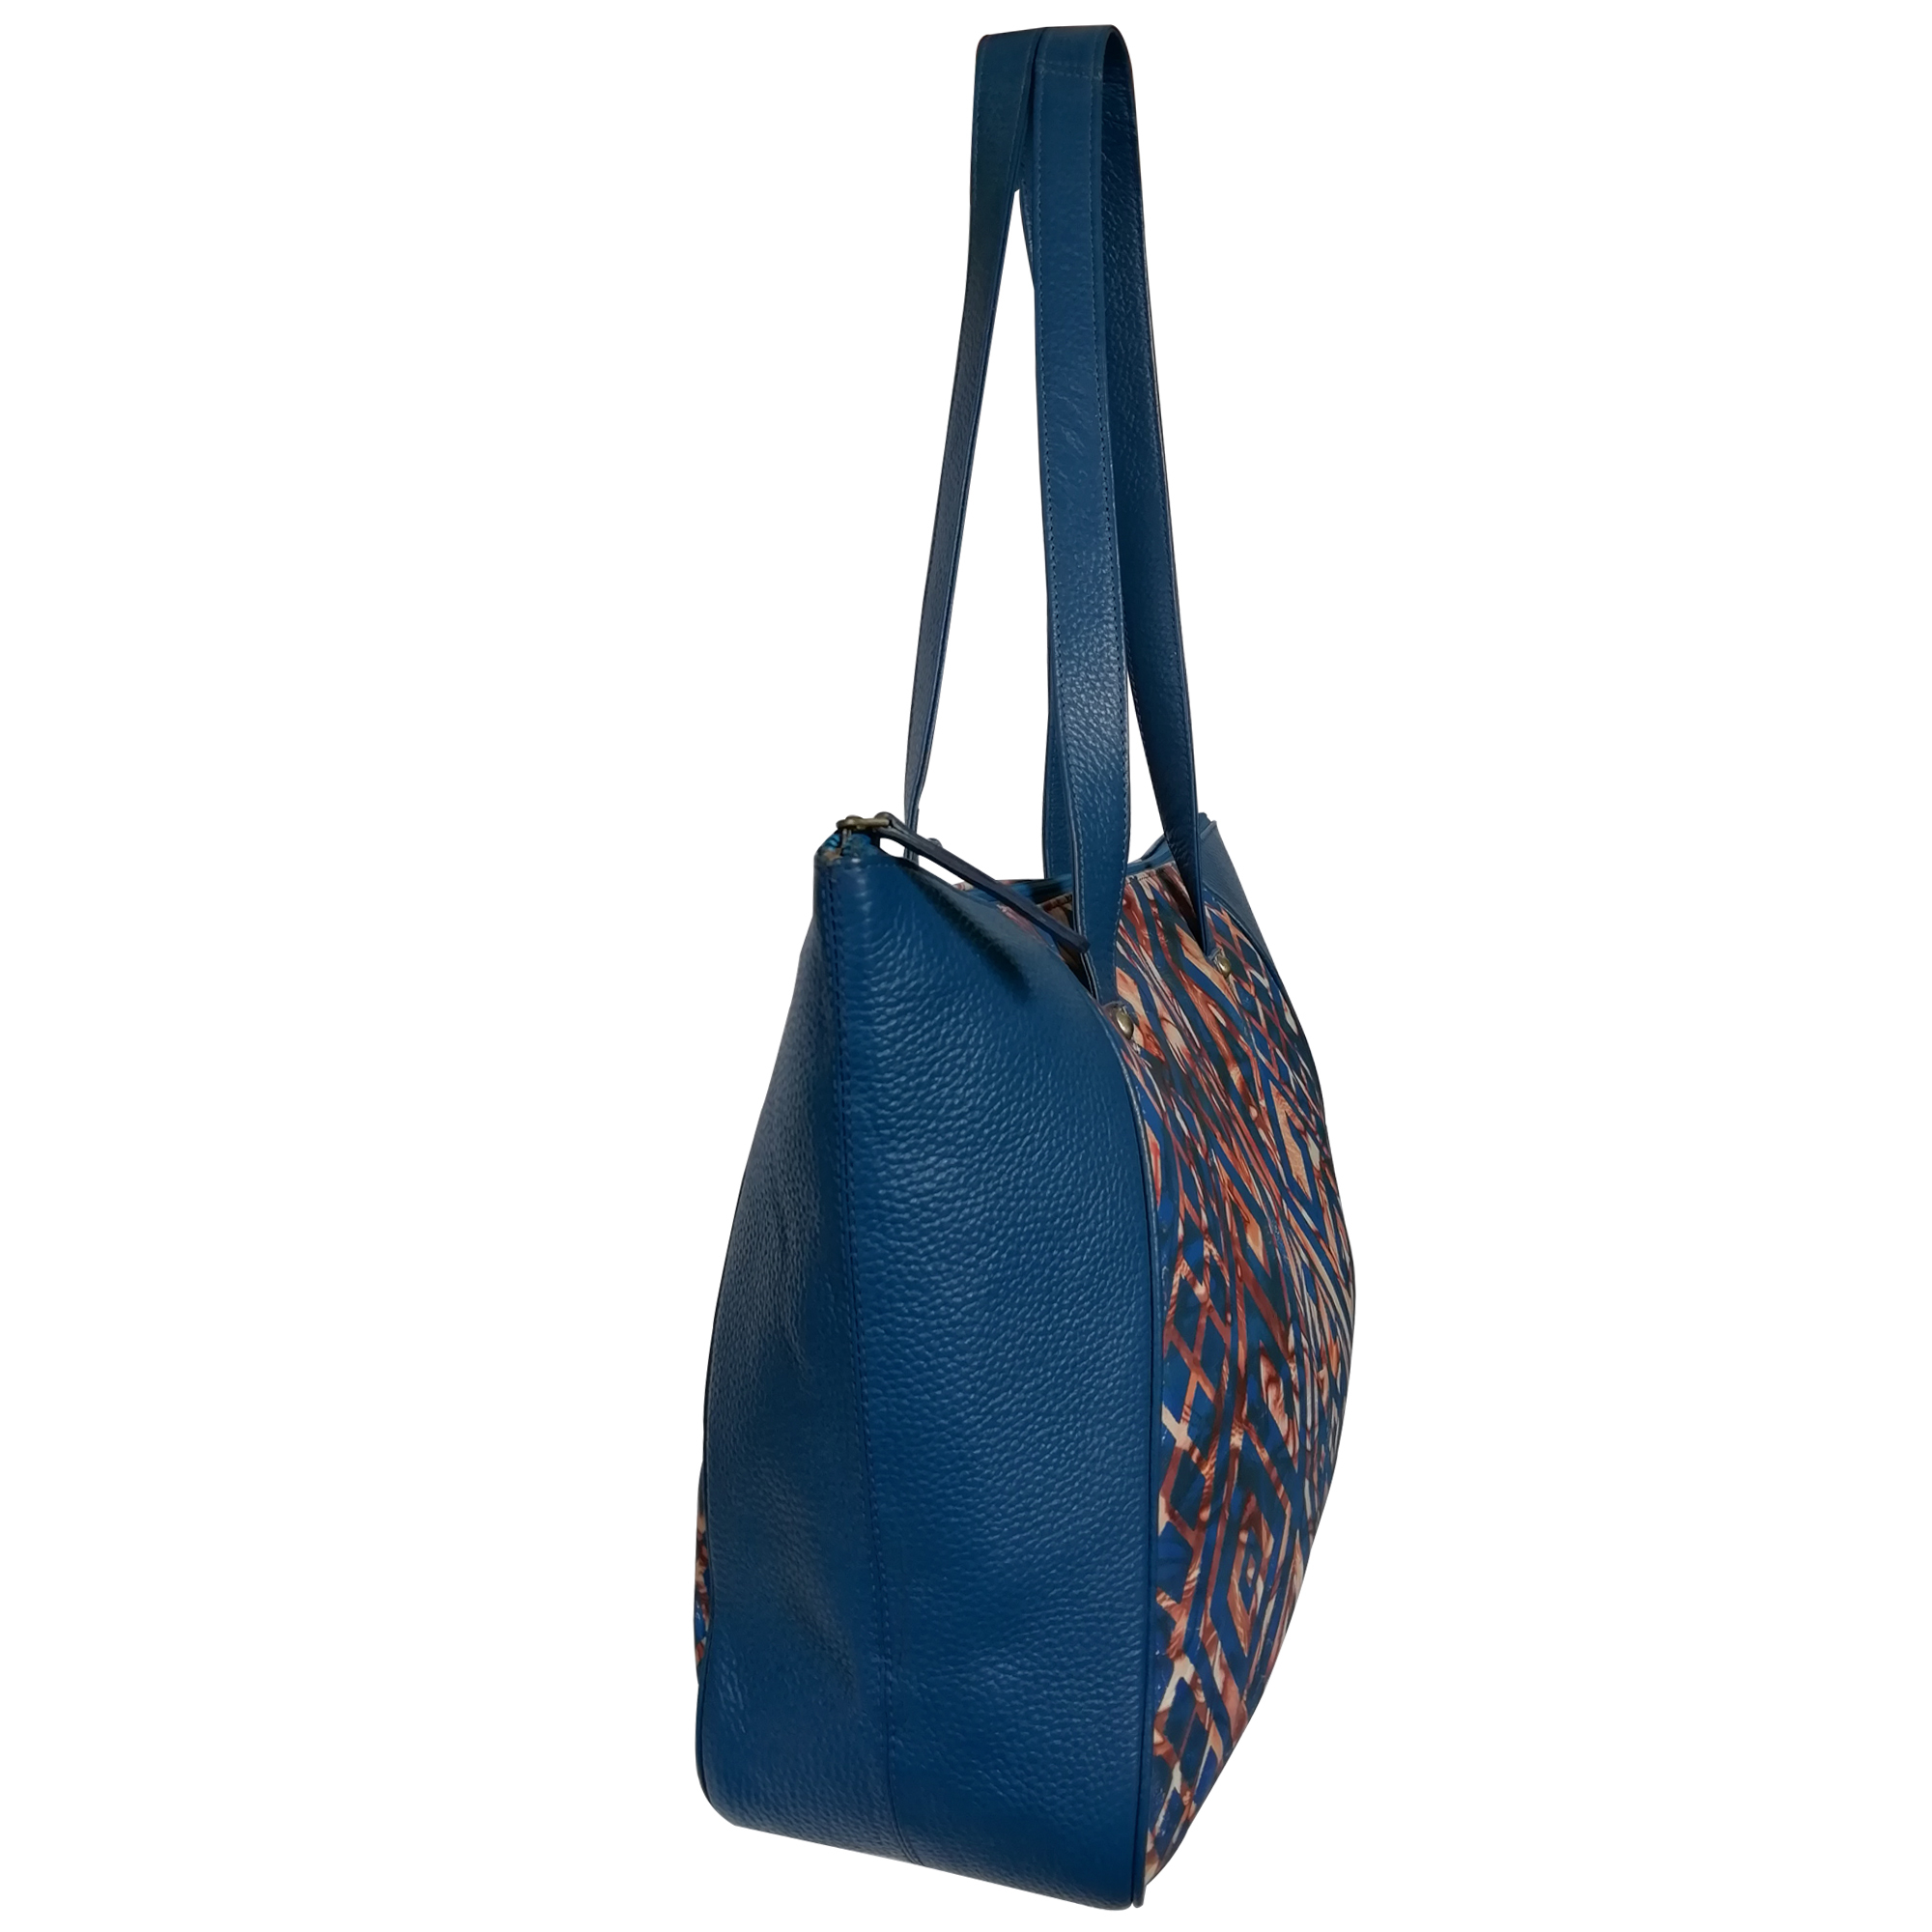 New Hand Painted Leather Tote For Women